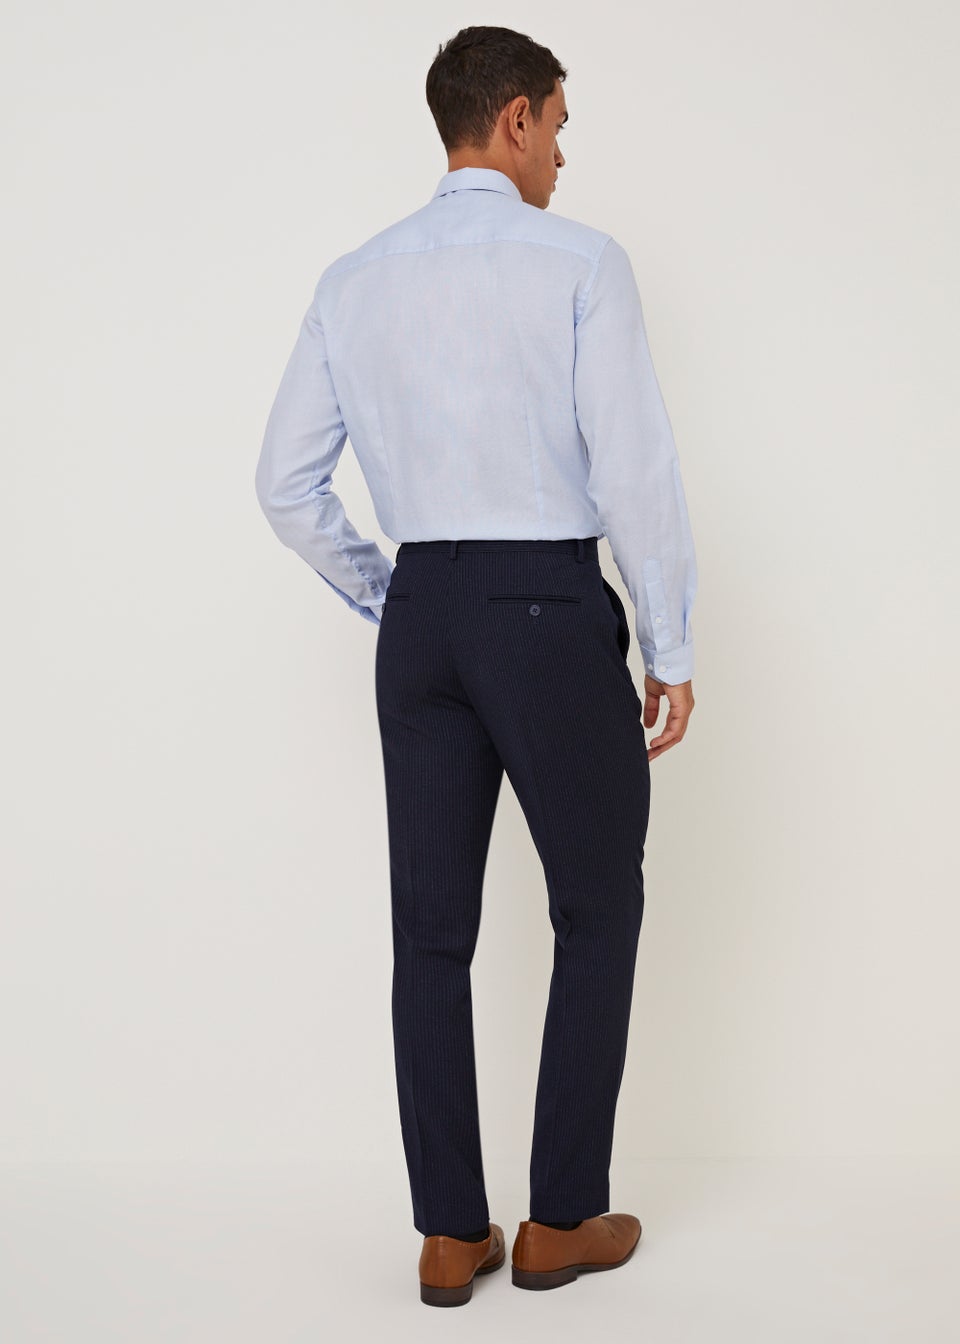 Taylor & Wright Milne Navy Skinny Fit Suit Trousers